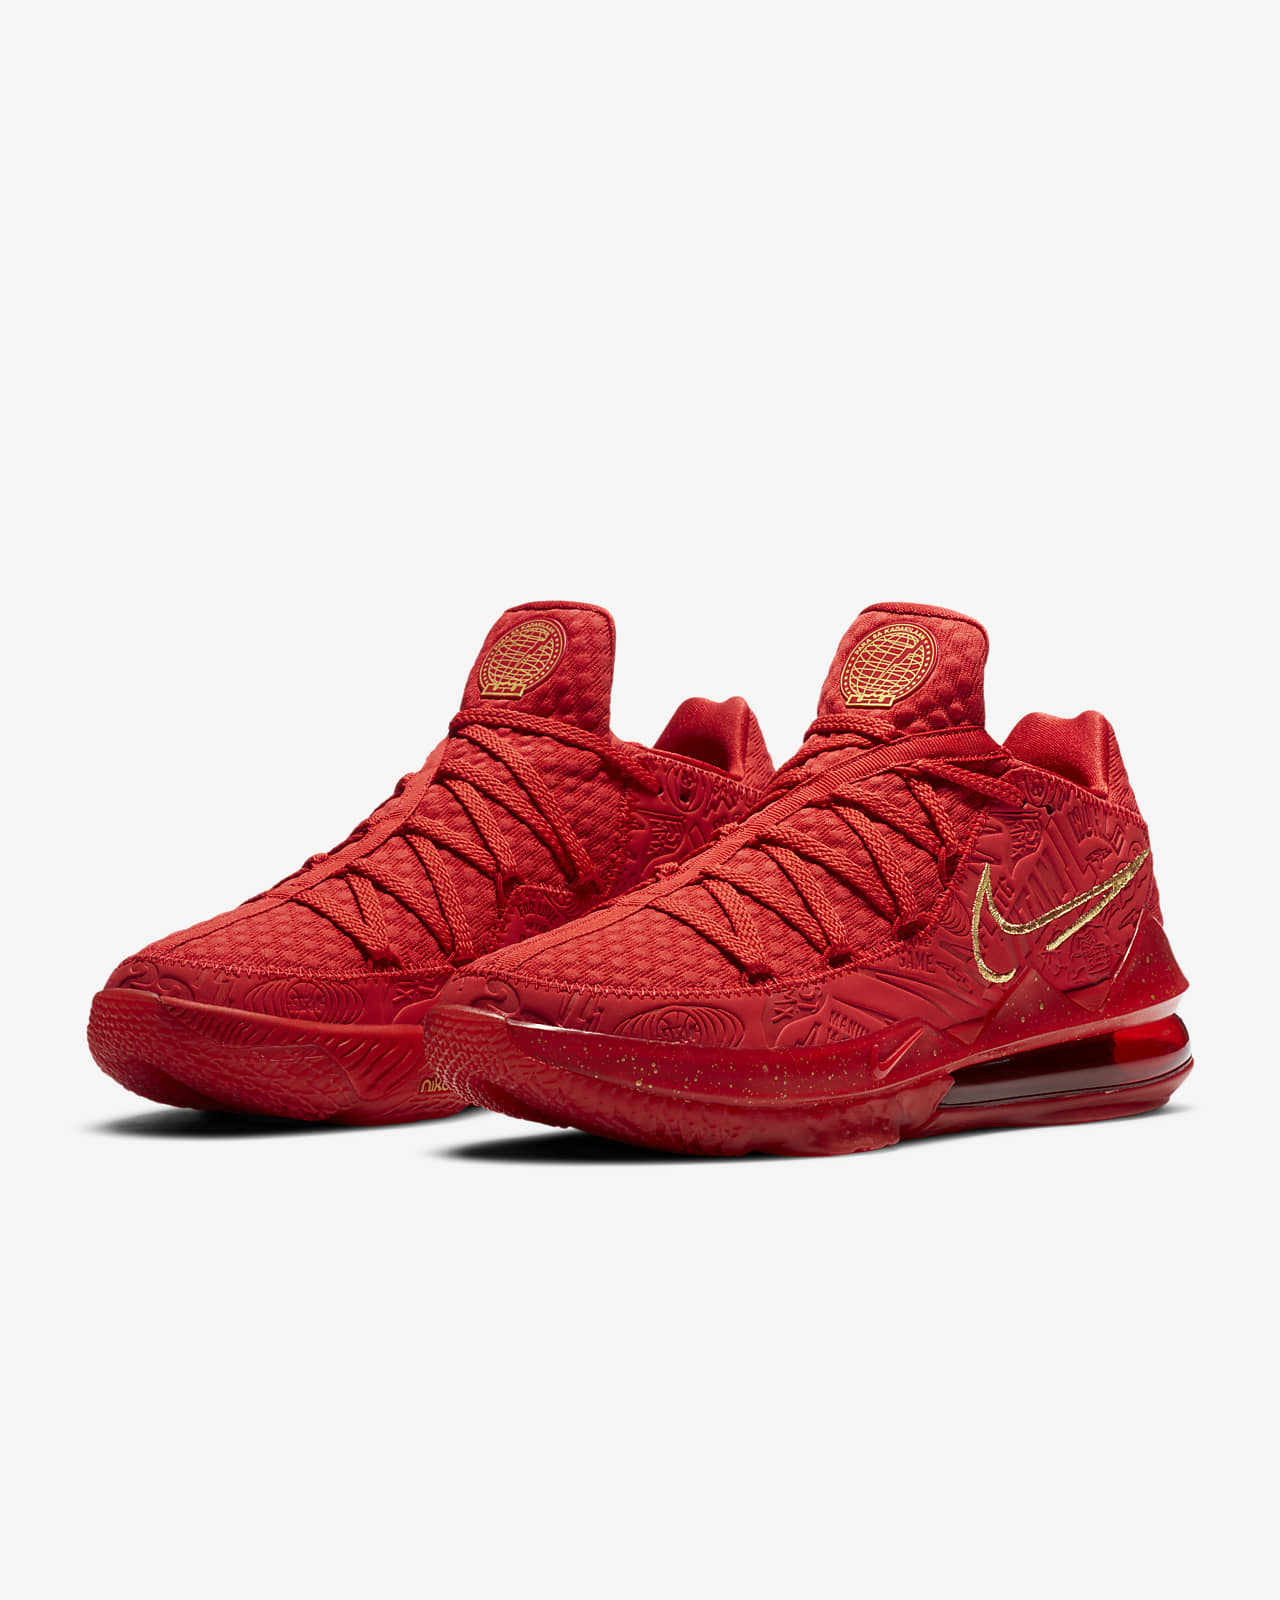 lebron 17 low red and gold